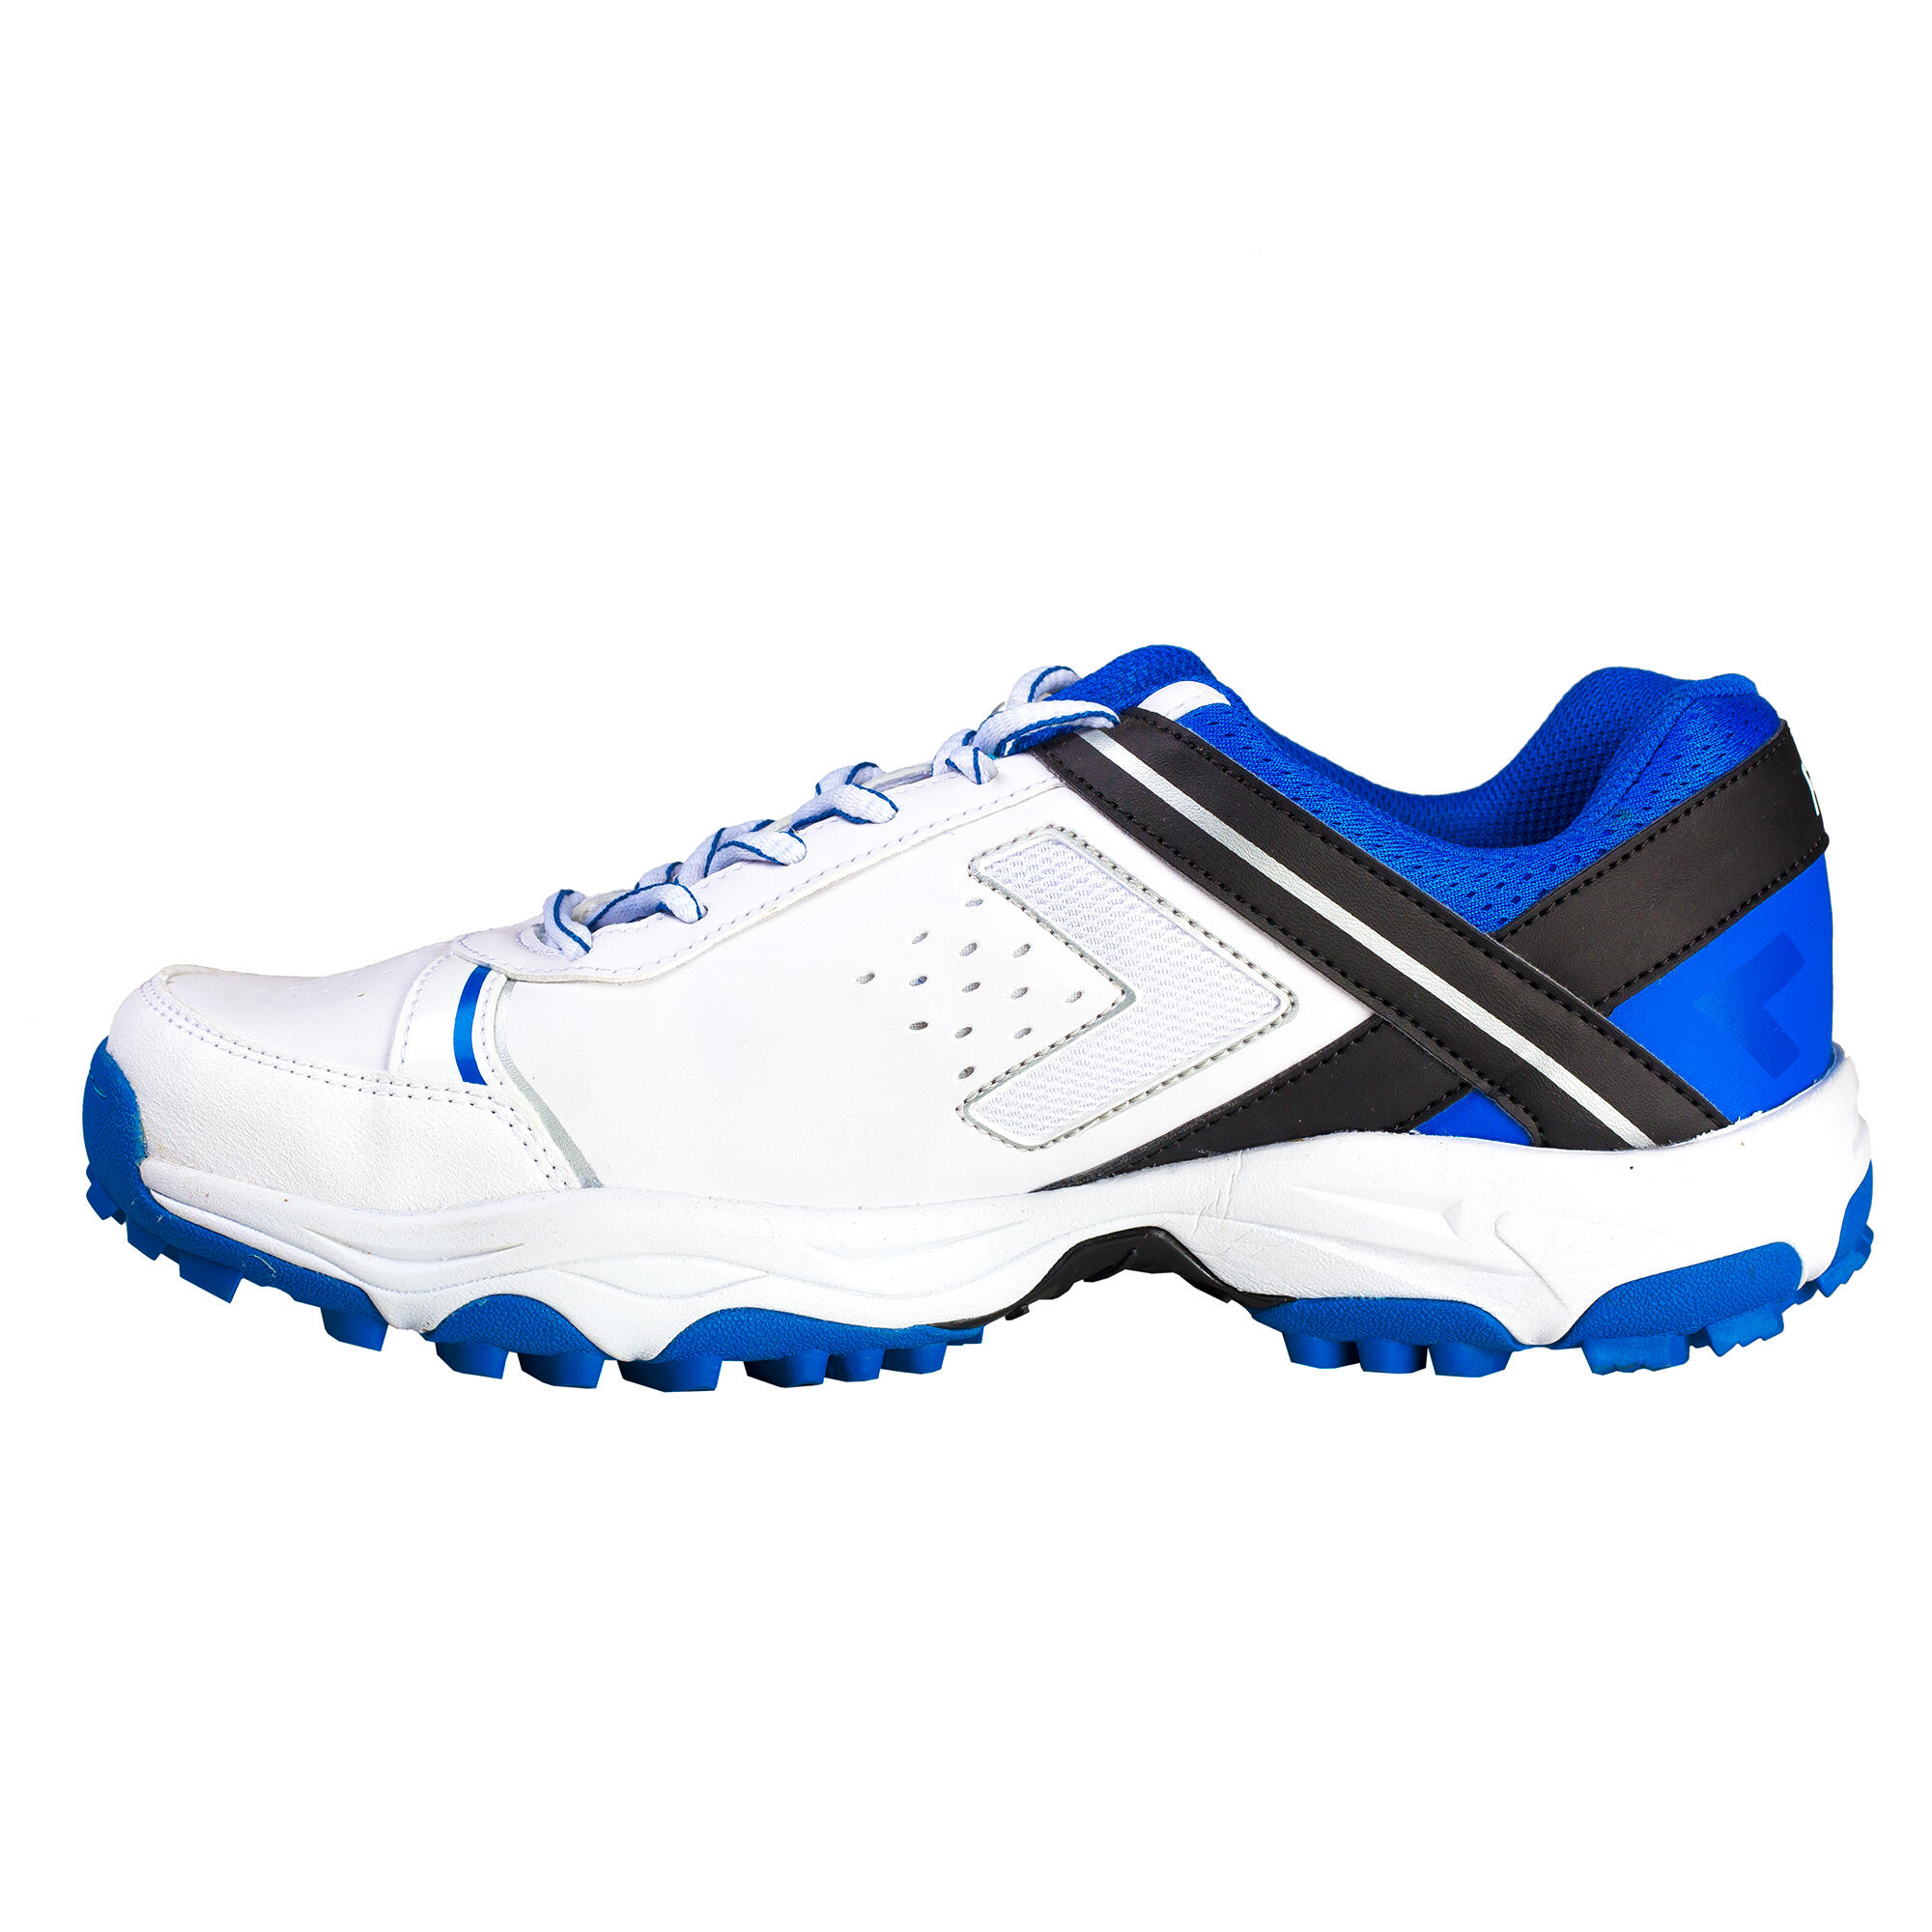 flx all rounder cricket shoes